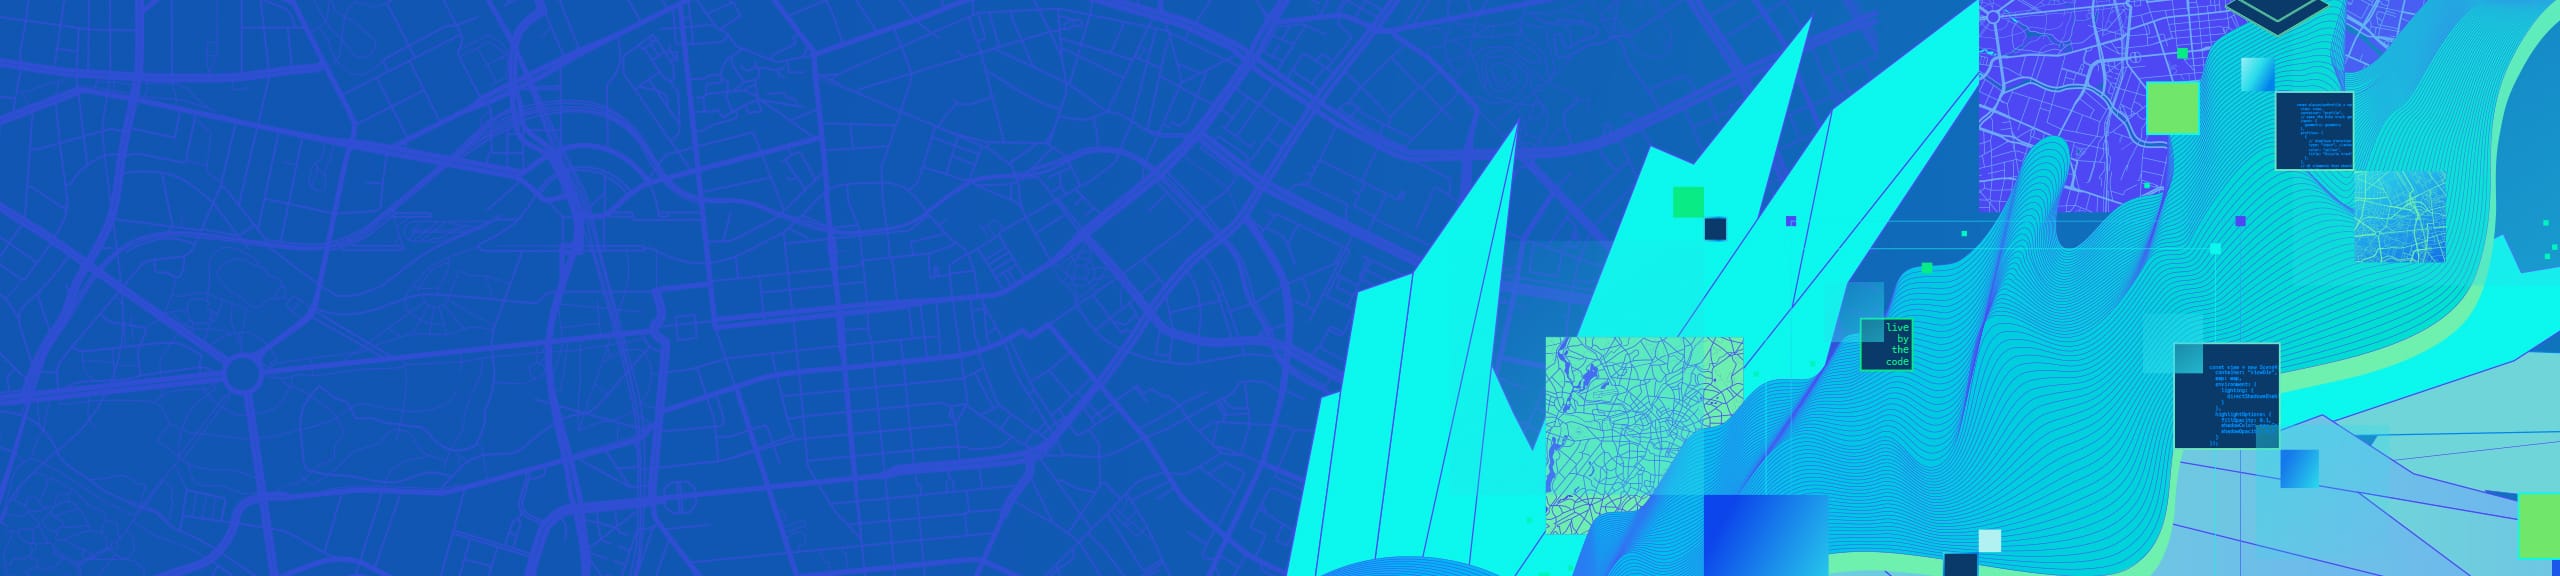 ,Blue, green, and aqua graphics depicting aerial view city street maps, blocks of code, wave patterns, and geometric shapes